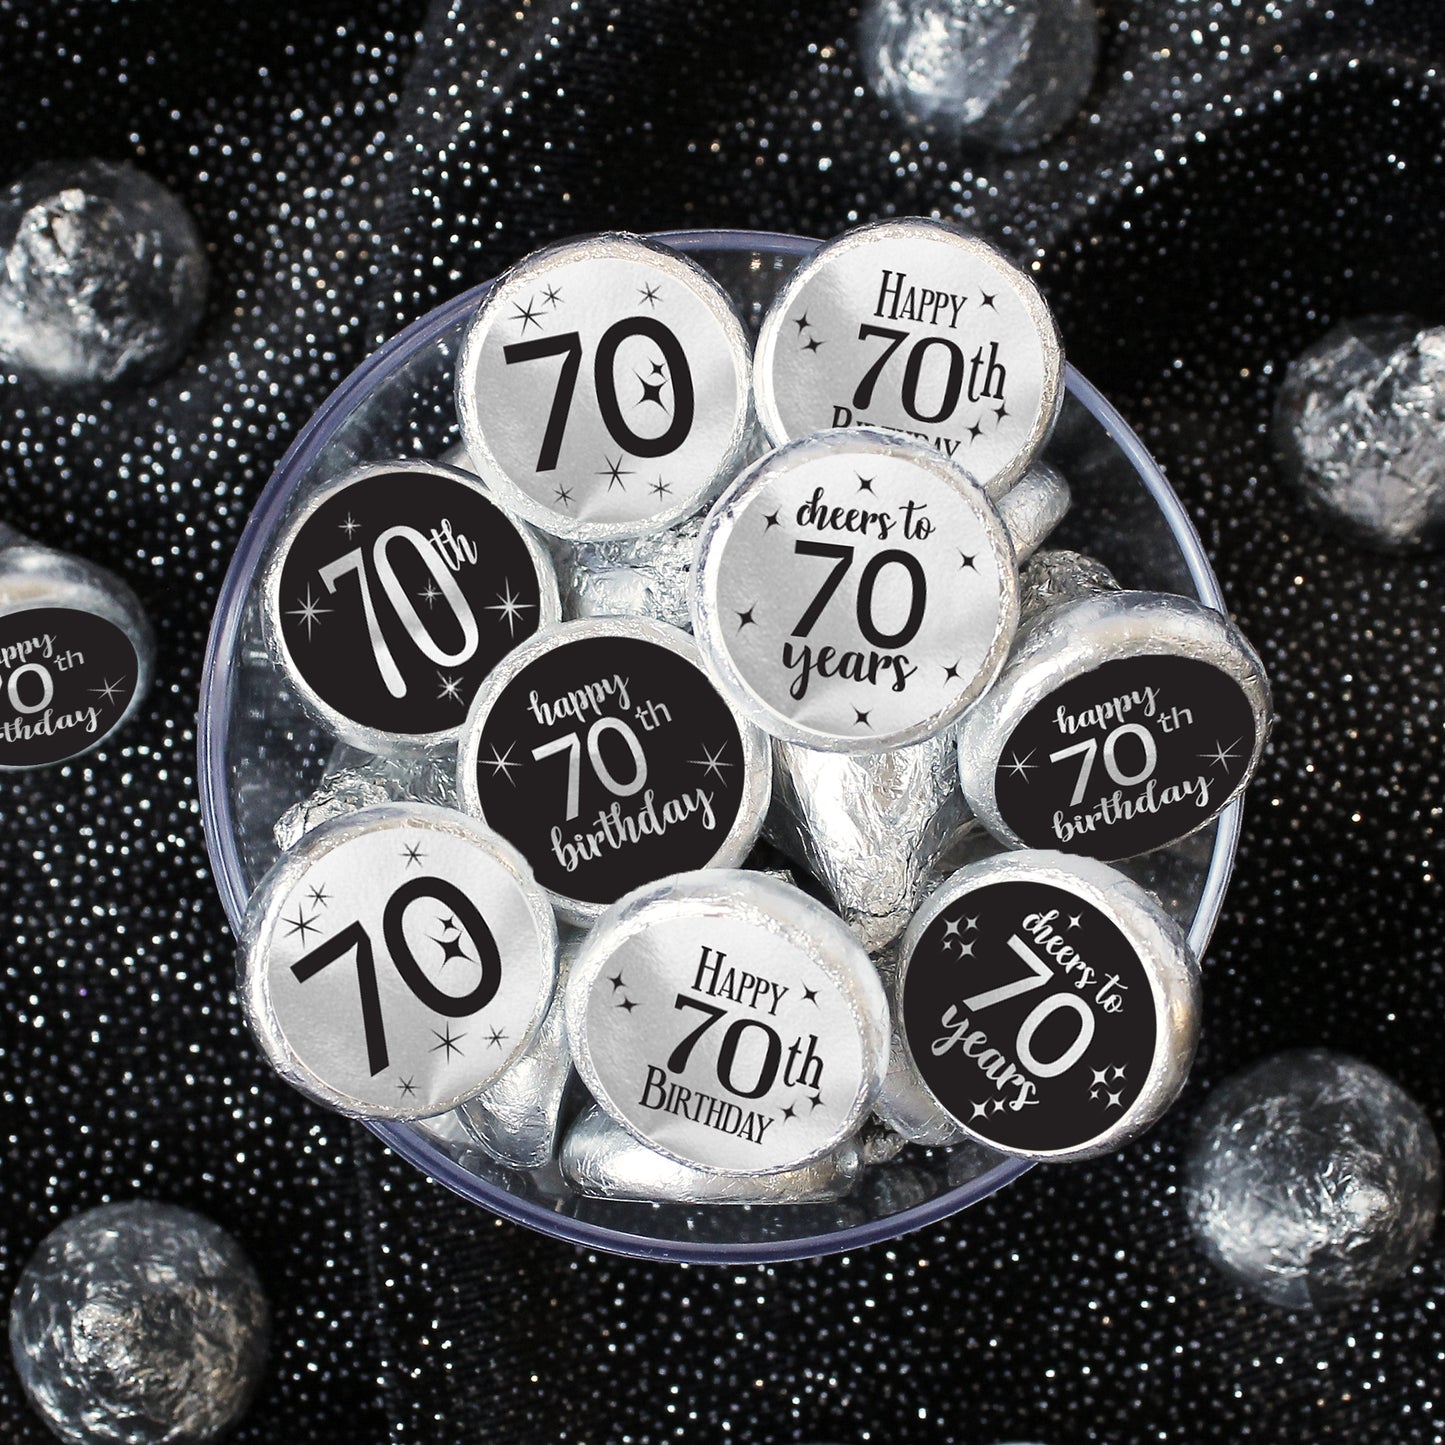 Black and Silver 70th Birthday Stickers - Fits on Hershey's Kisses - 180 Pack